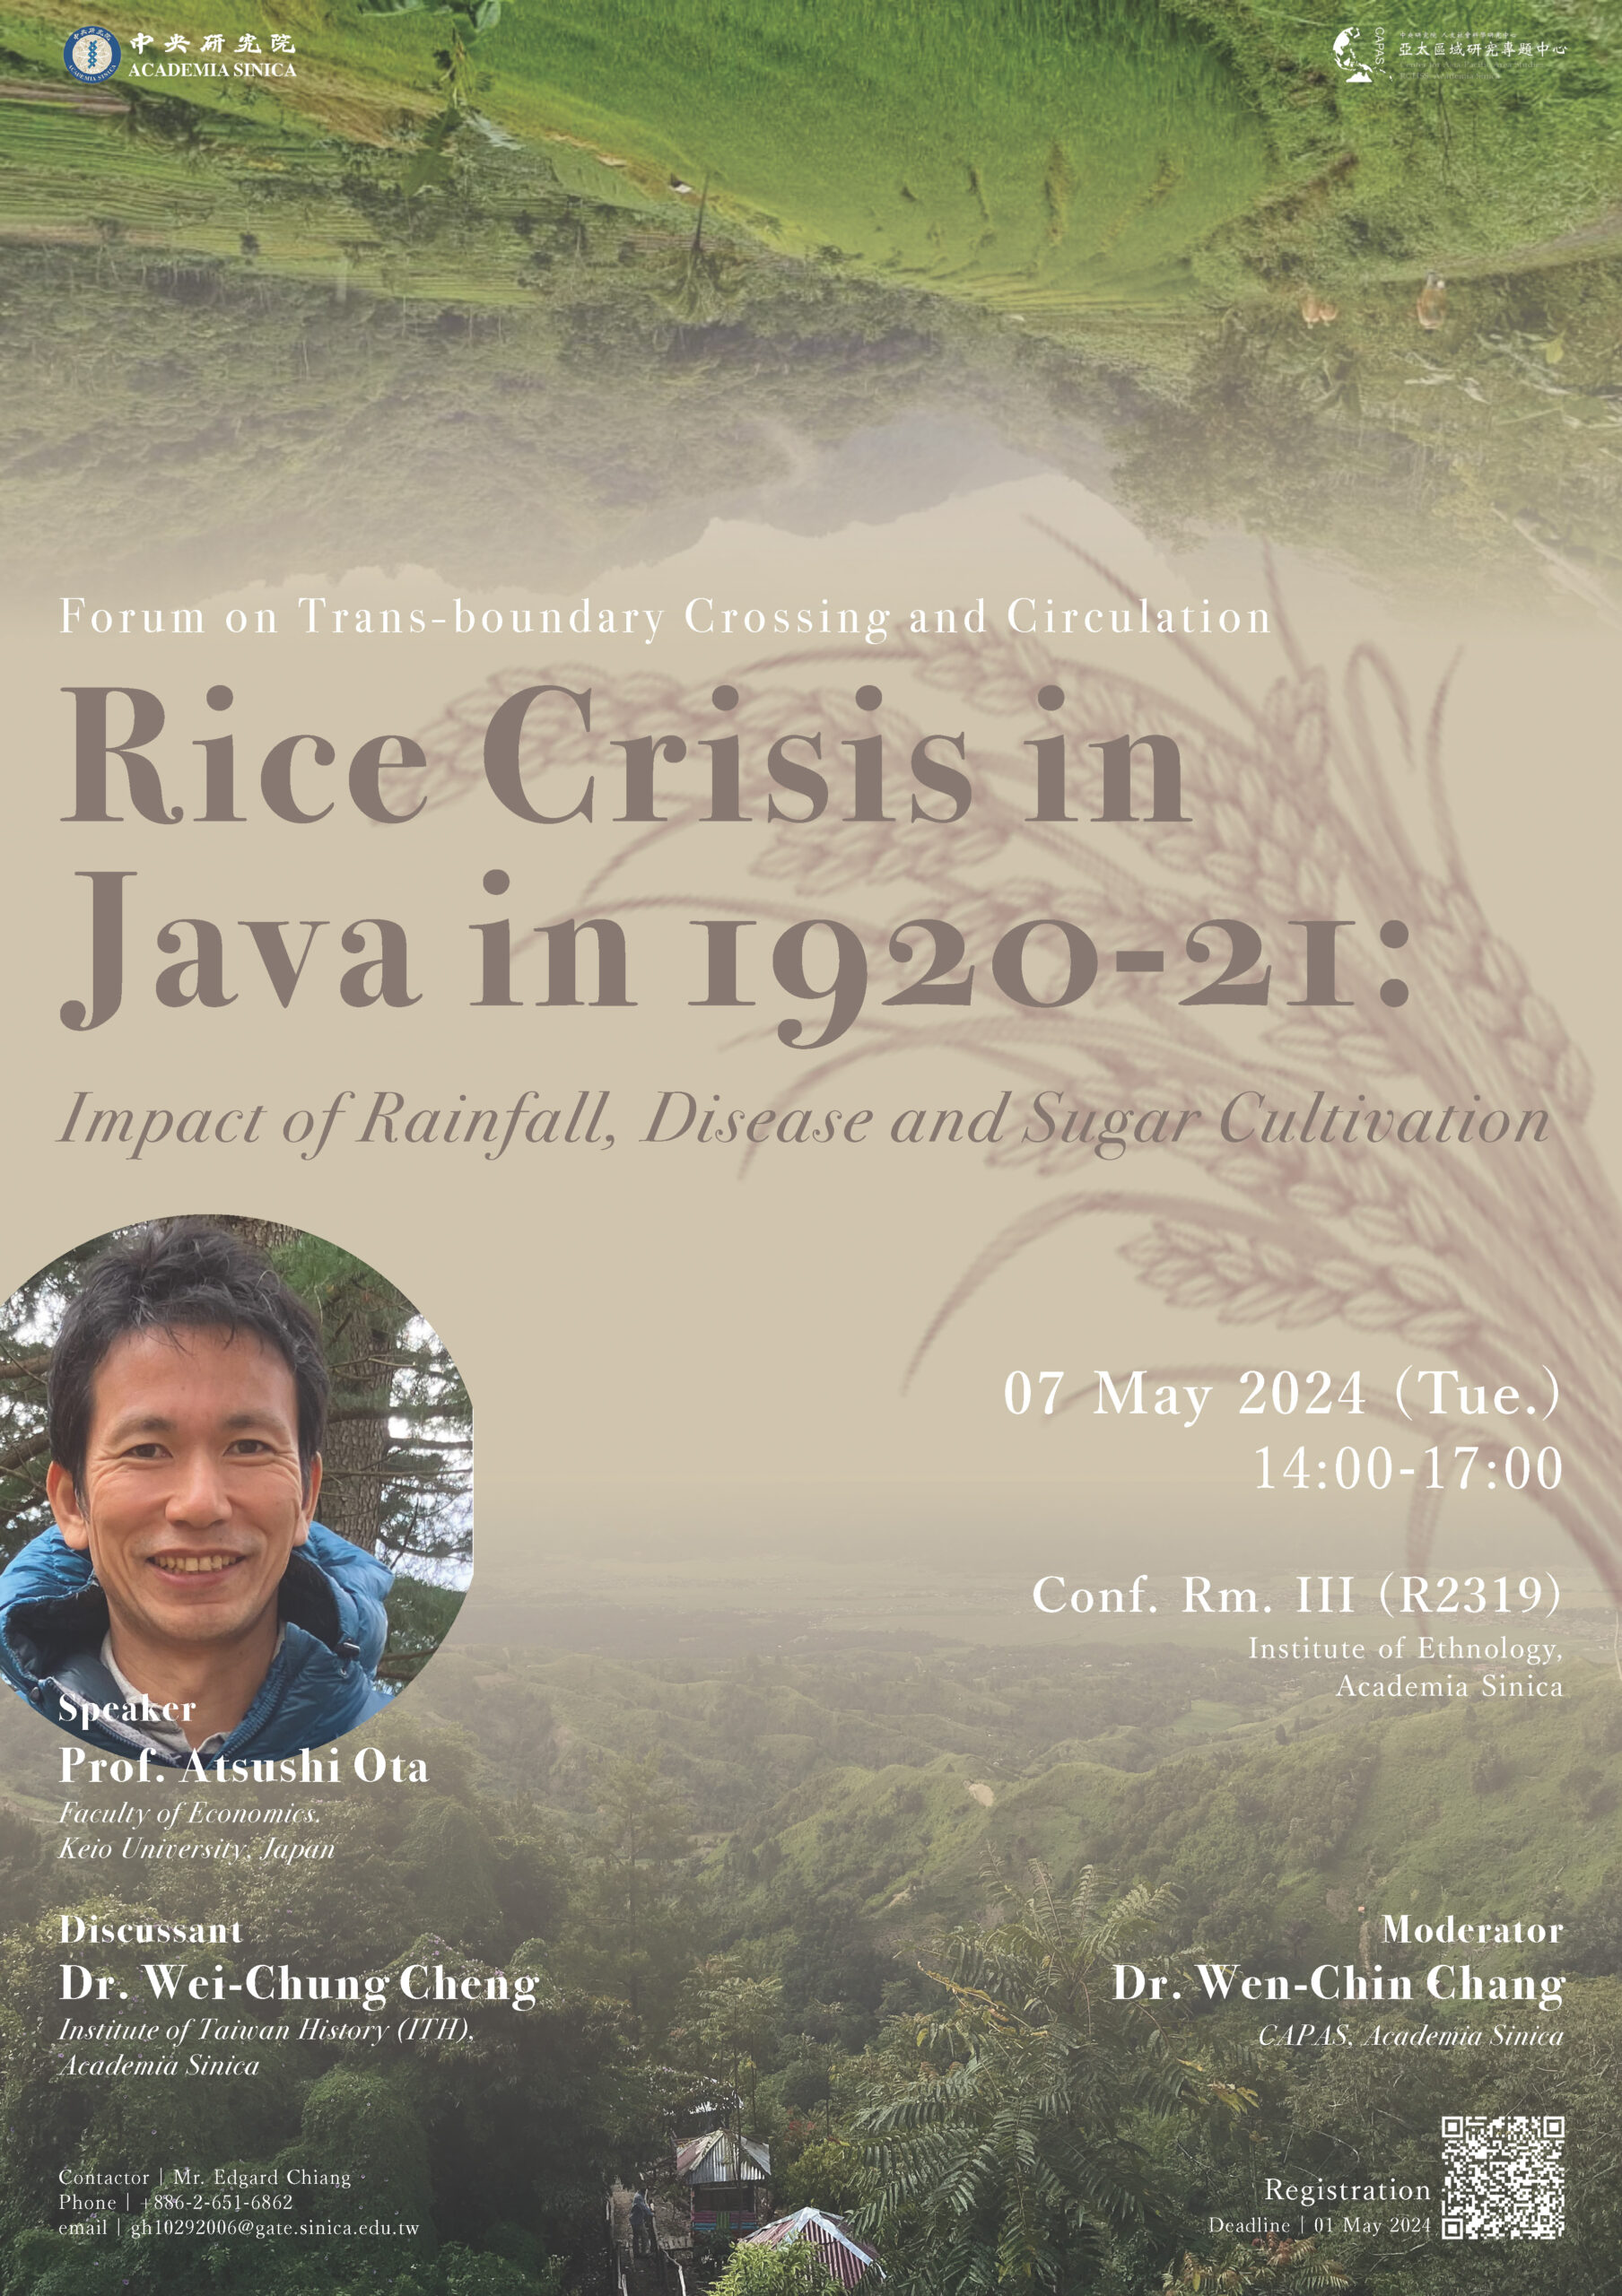 Forum on Trans-Boundary Crossing and Circulation by Prof. Atsushi Ota “Rice Crisis in Java in 1920-21: Impacts of Rainfall, Disease, and Sugar Cultivation”